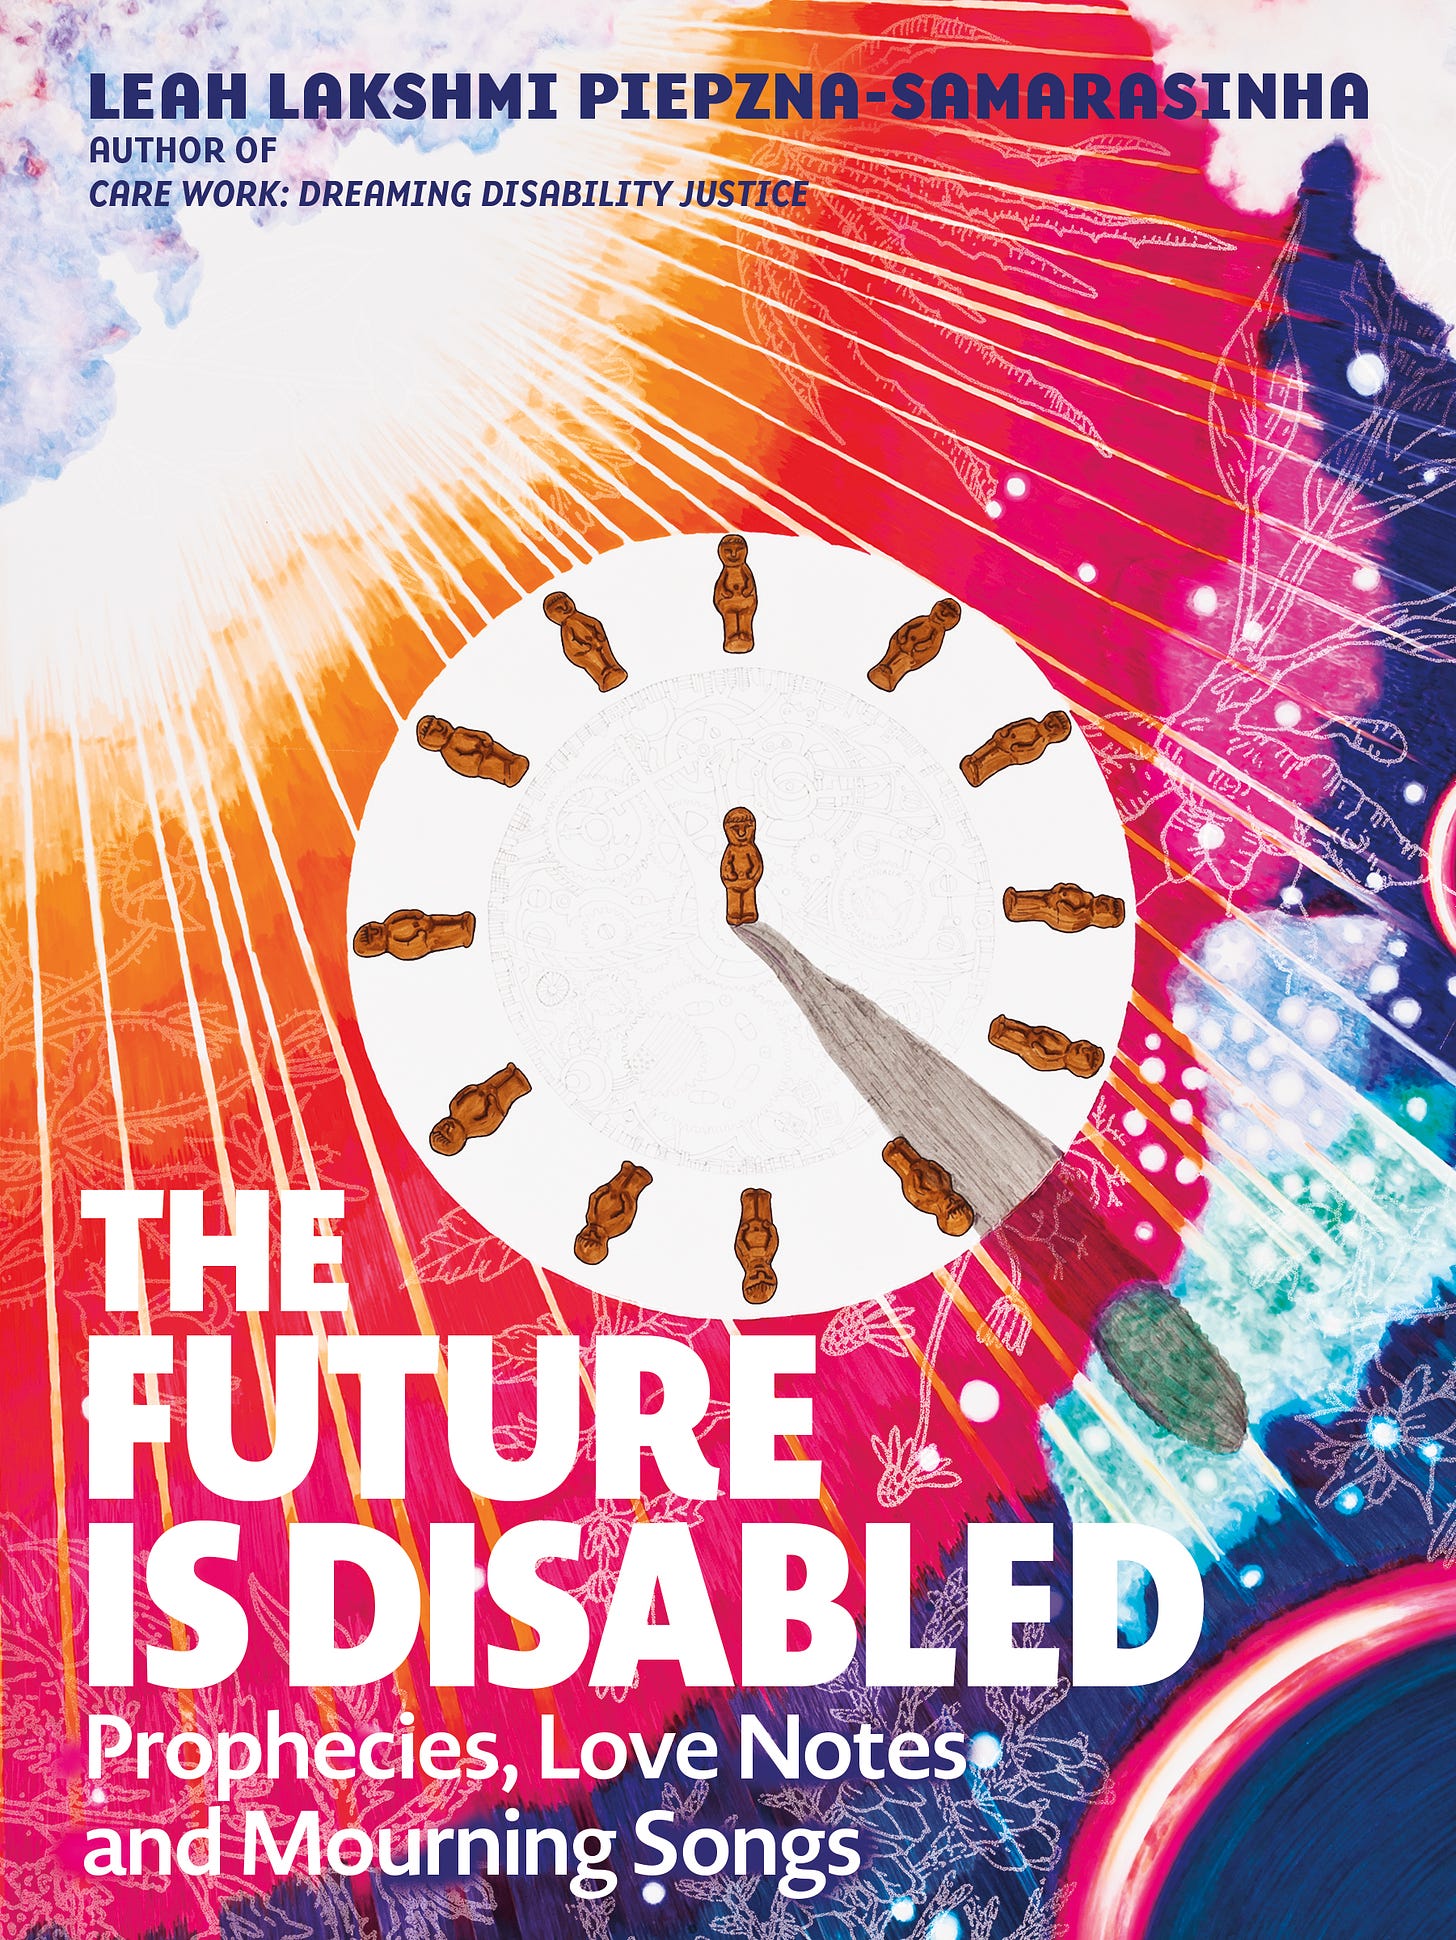 Promo graphic of cover of the book “The Future Is Disabled” created by artist Textaqueen. Main image is of a sundial with small brown human figures representing the numbers. Behind it is the image of a sun, whose white rays extend over a field of orange, red, pink, and blue fields.   